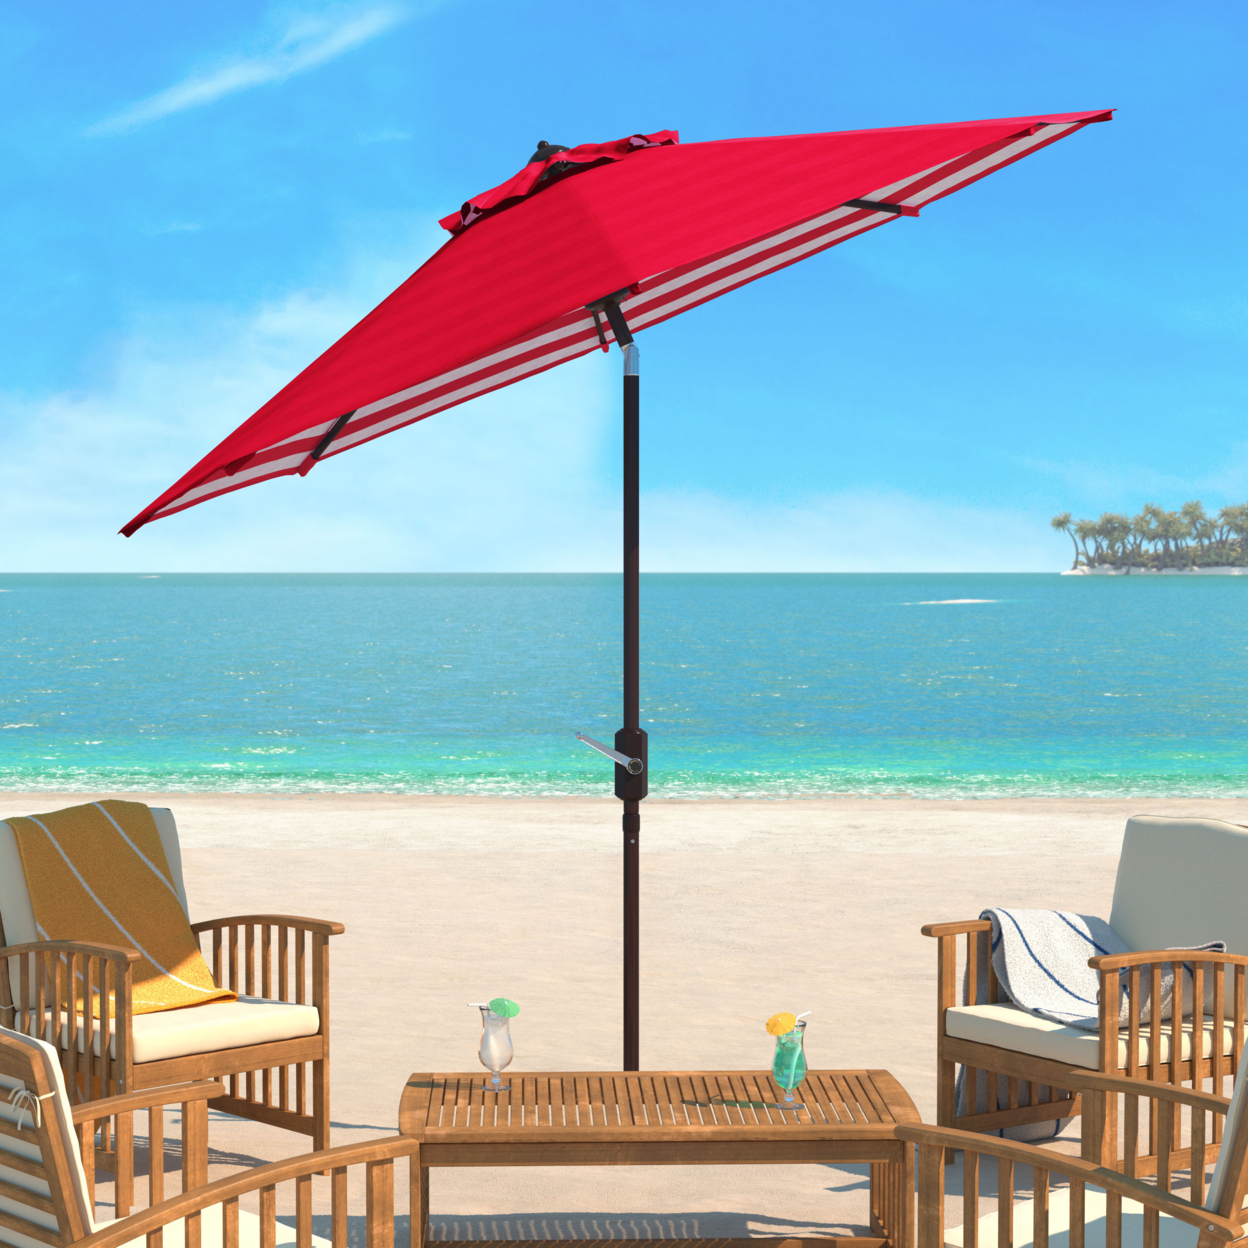 SAFAVIEH Outdoor Collection Athens Inside Out Striped 9-Foot Umbrella Red/White